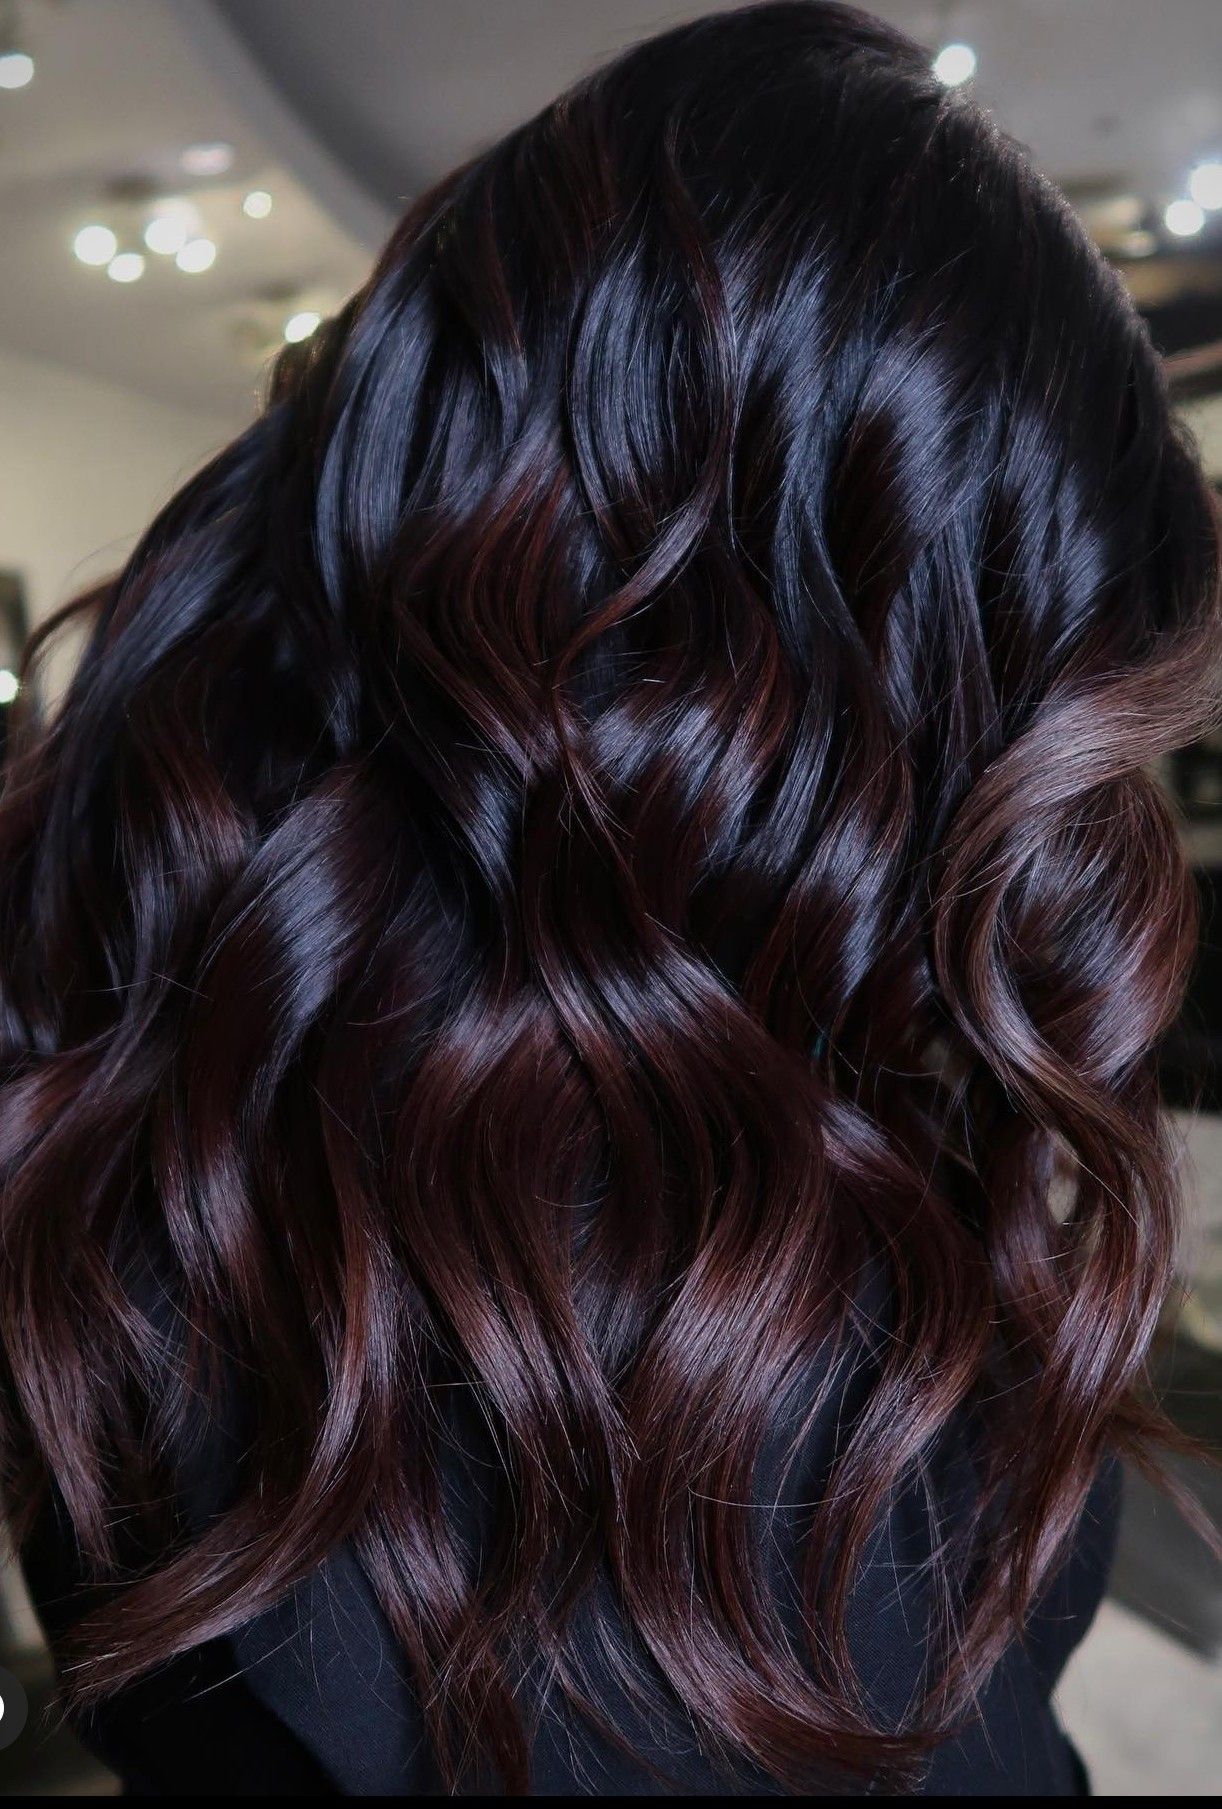 Stunning Hair Colors to Rock This Winter